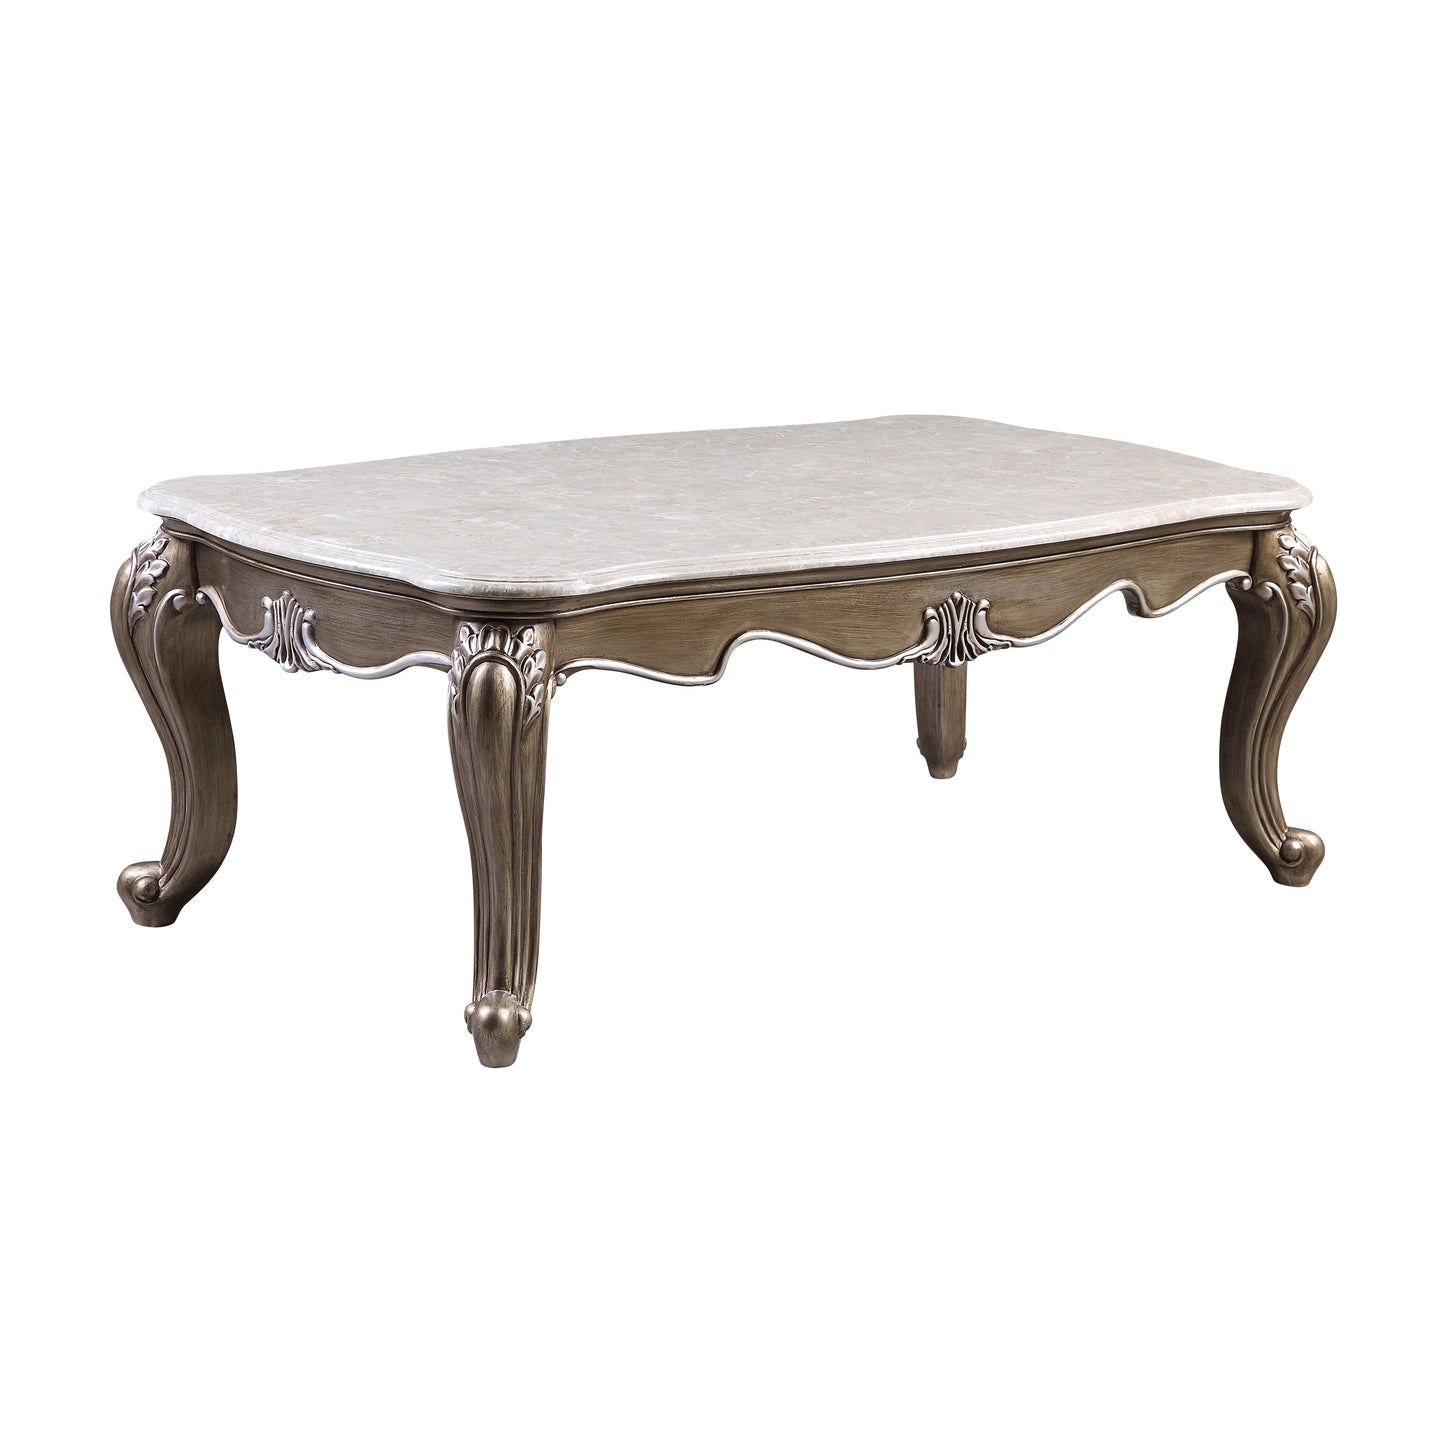 Elozzol Marble Top Coffee Table with Antique Bronze Finish LV00302